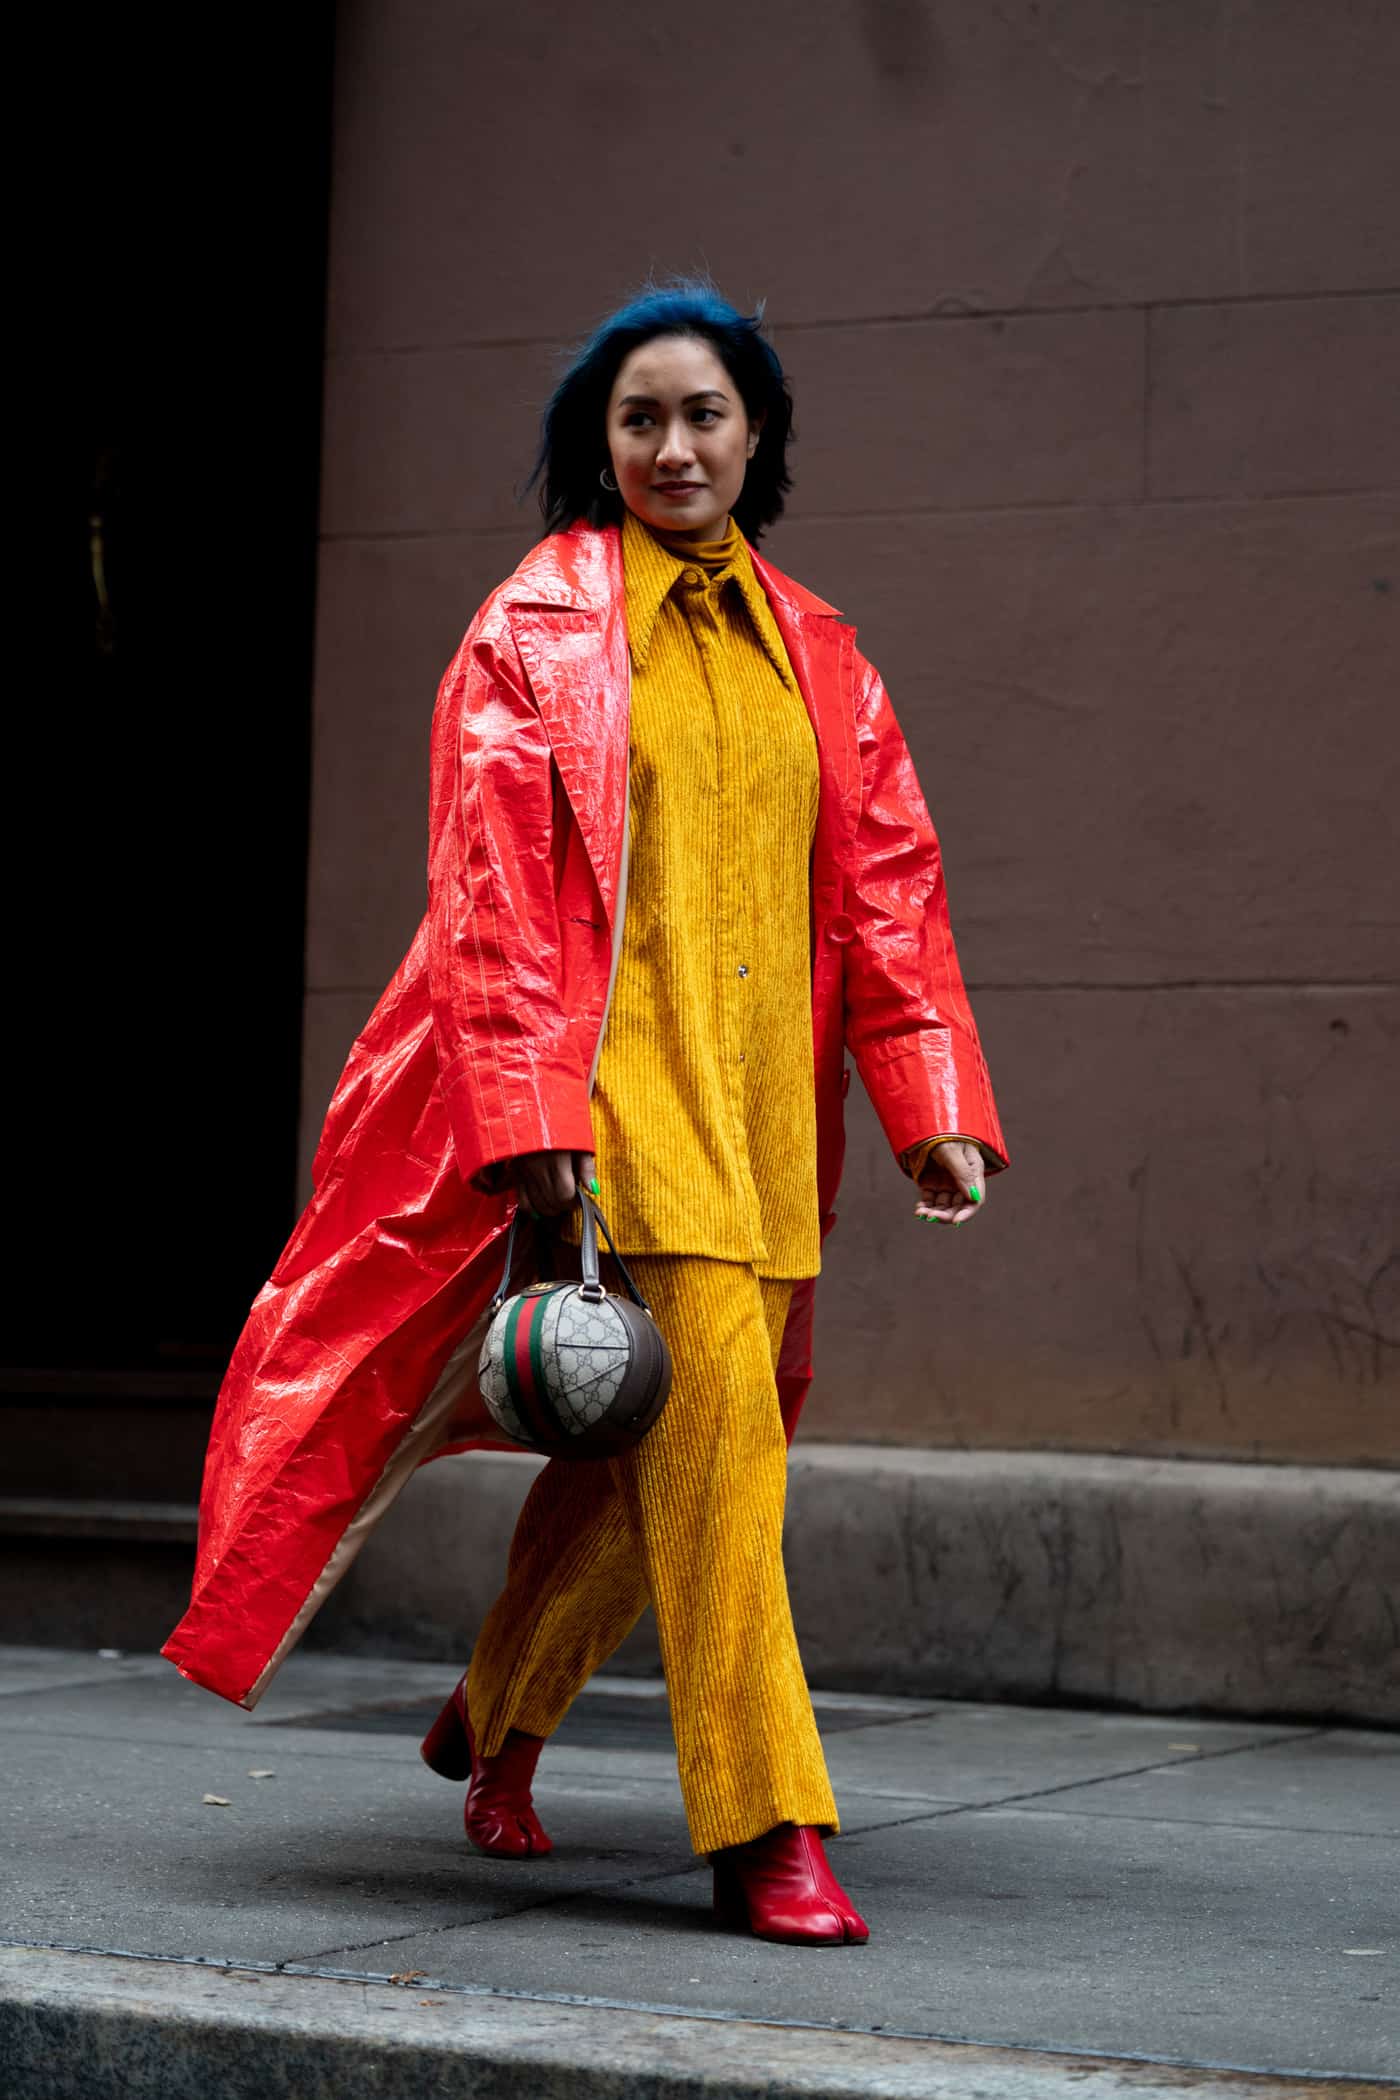 39 Best Street Style Looks From Days 1 and 2 of NYFW